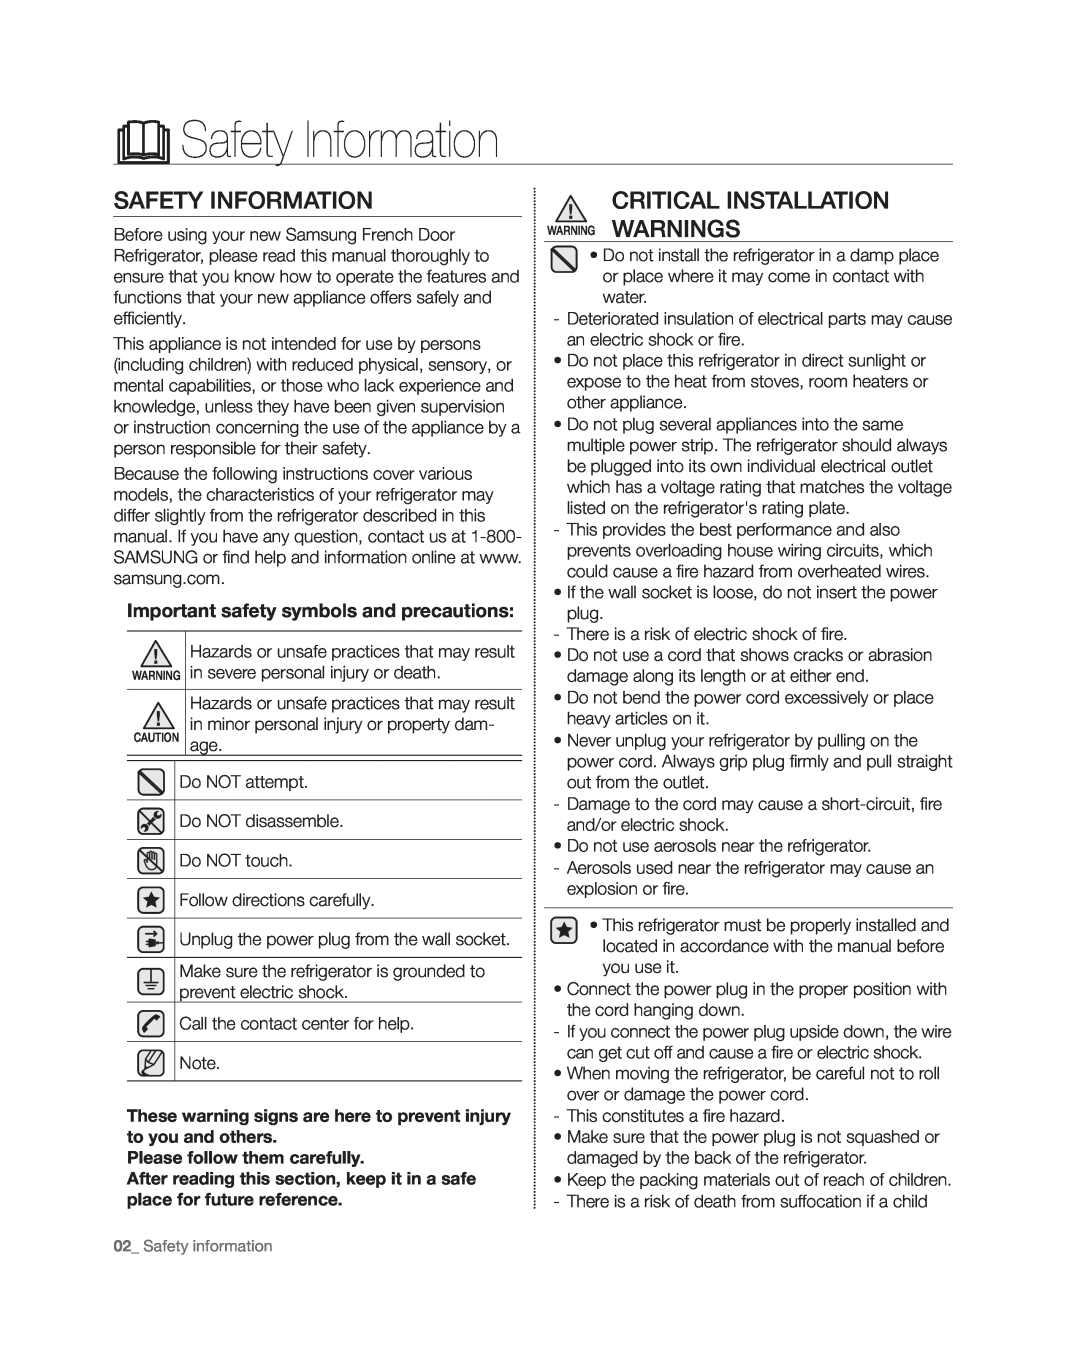 Samsung RF4267HA user manual Safety Information, Important safety symbols and precautions, Please follow them carefully 